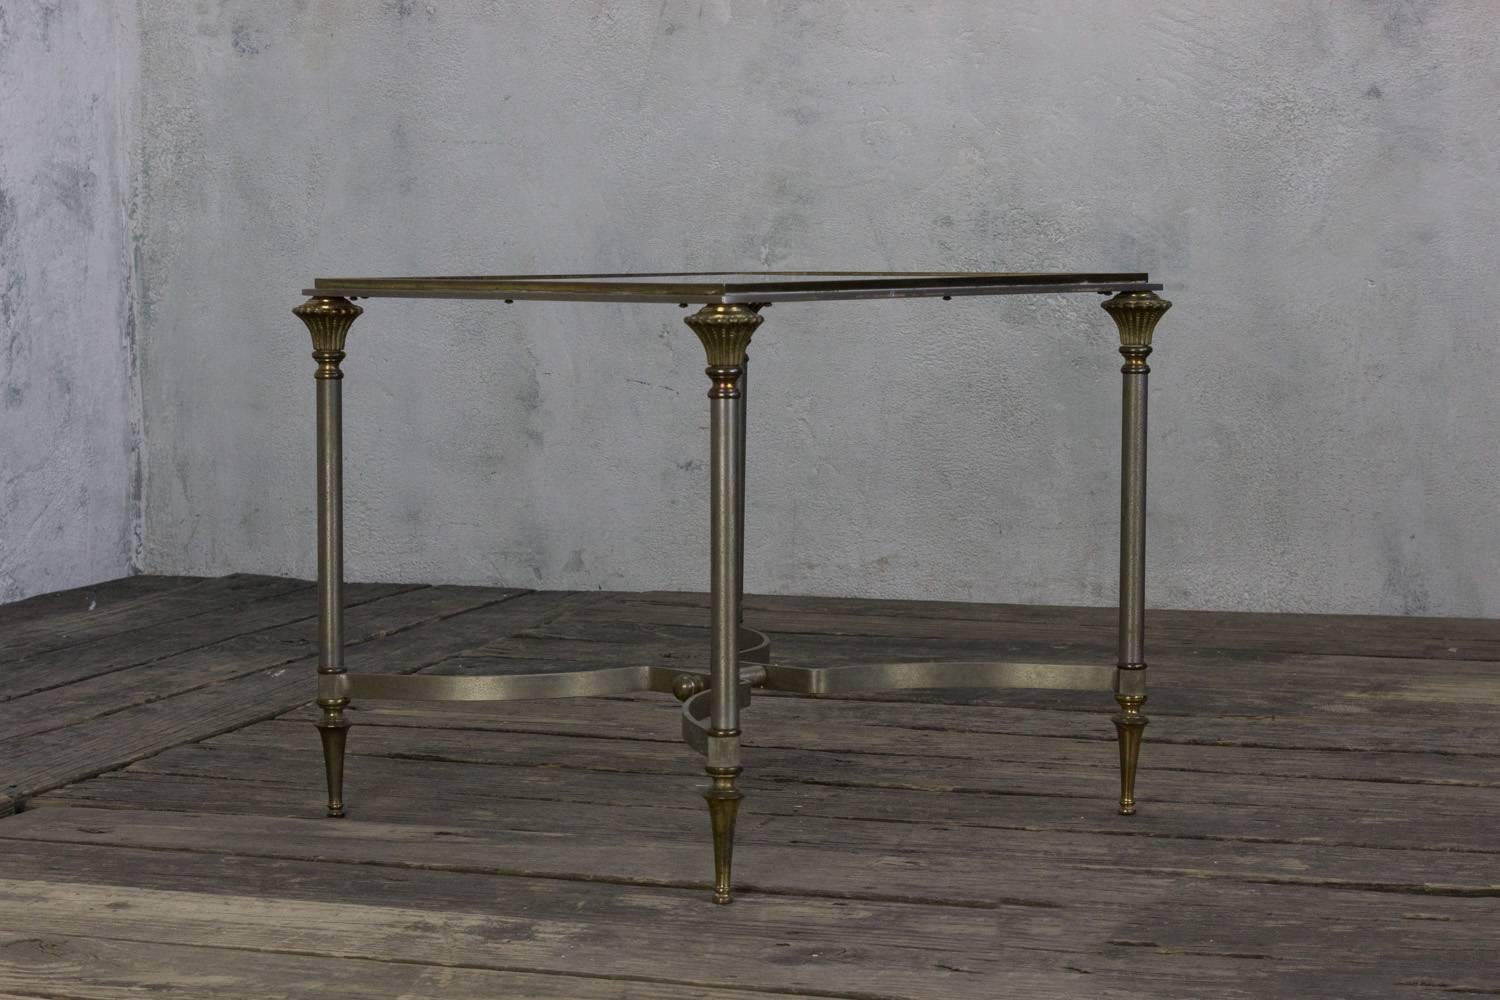 Elegant 1940s Italian end table with steel and brass components, made in the style of Maison Jensen. The top is inset glass. Good vintage condition.

Ref #: ET0108-01

Dimensions: 17